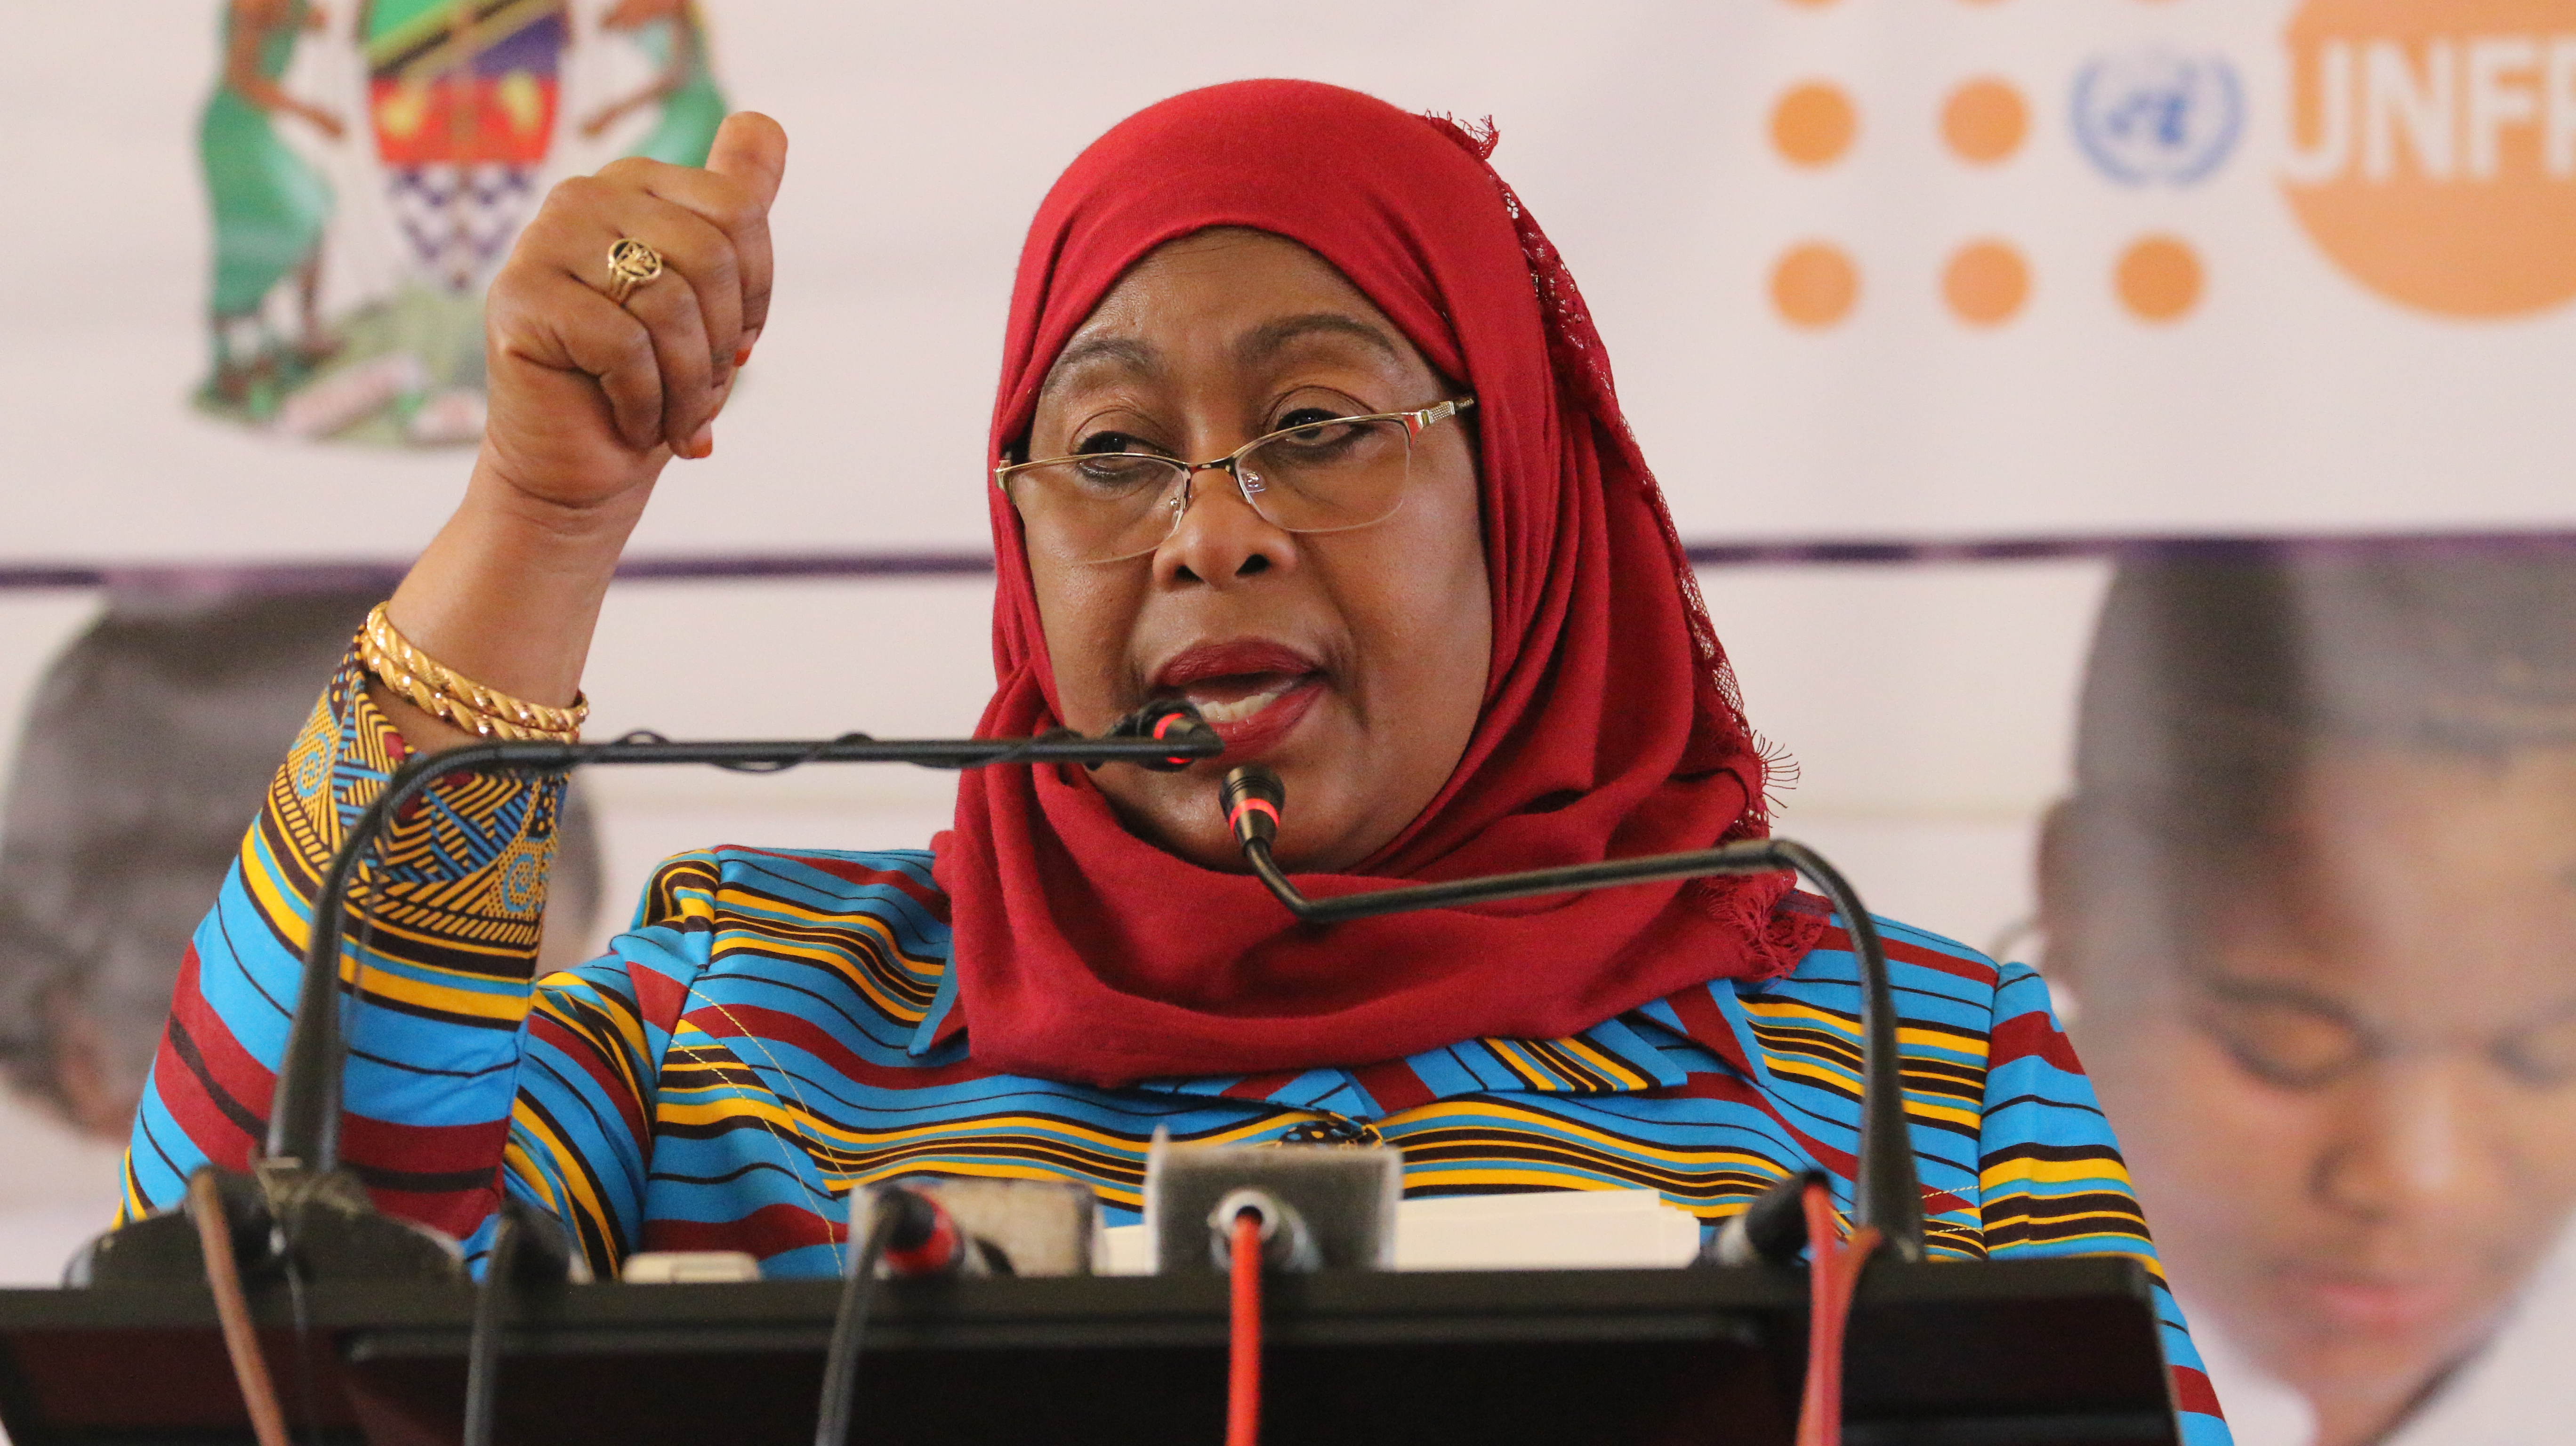 UNFPA Tanzania | Vice President of Tanzania Hon.Samia Hassan Suluhu attends  the celebrations to mark the International Day of the Midwife